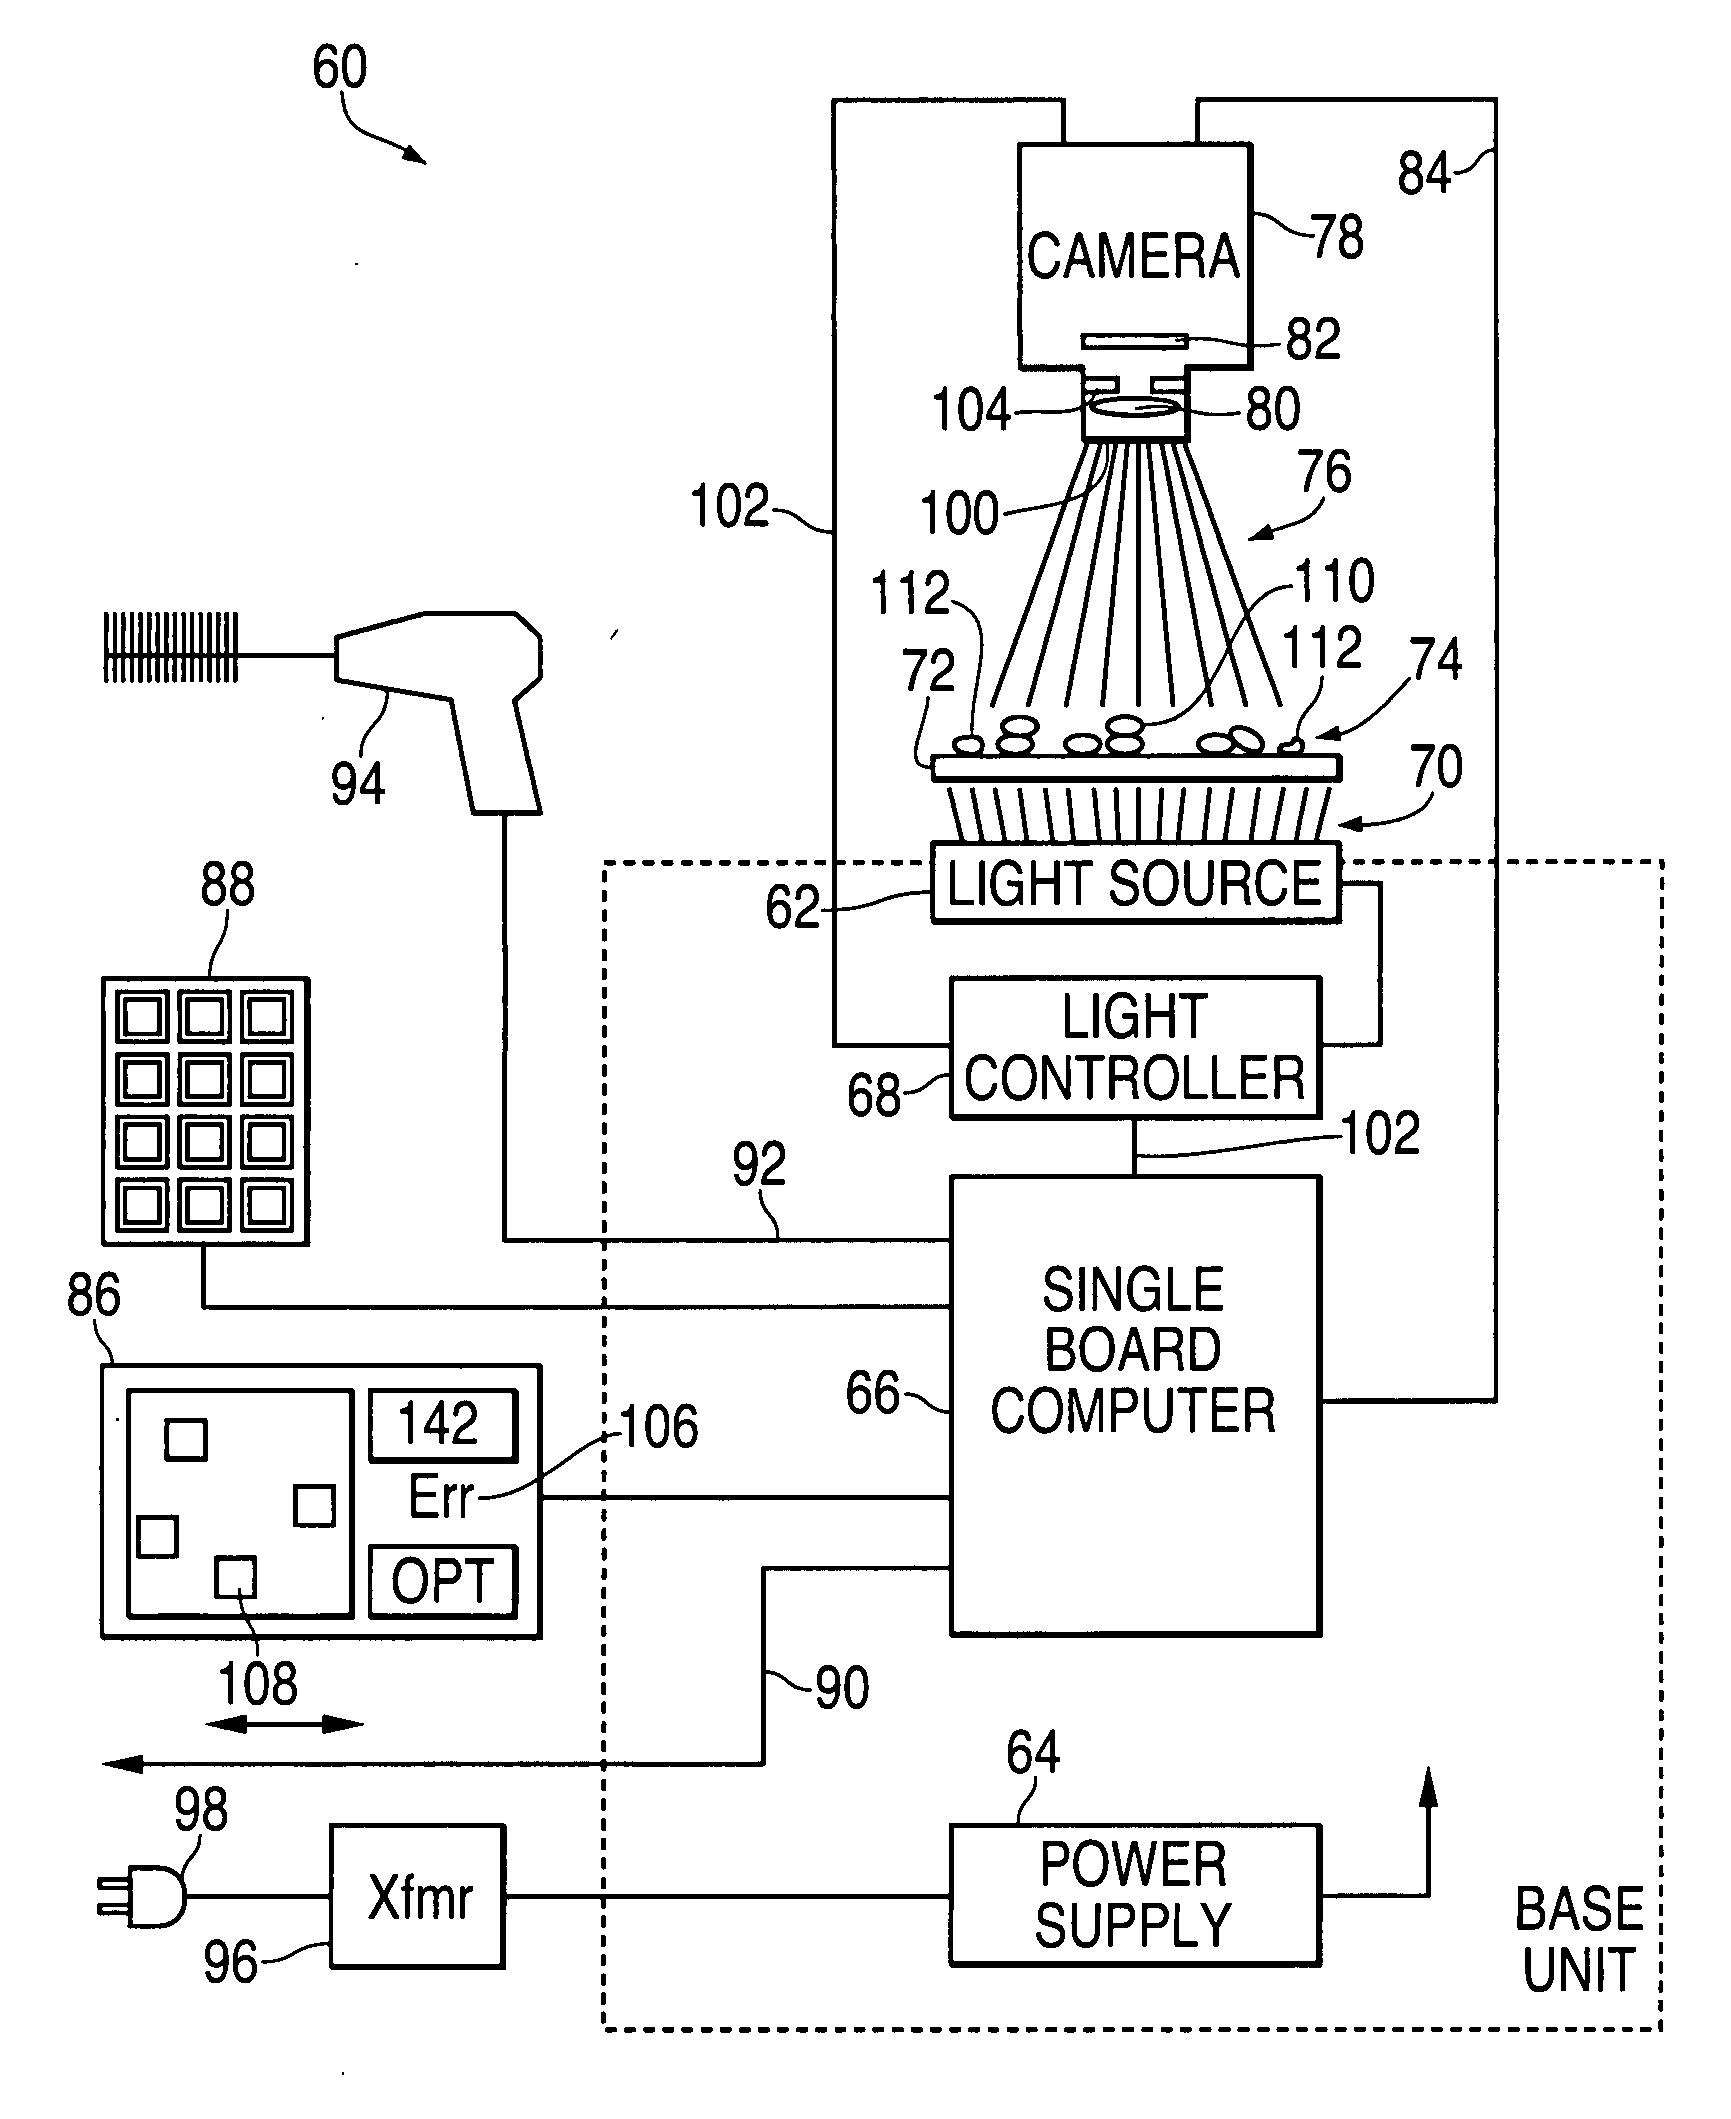 Machine vision counting system apparatus and method